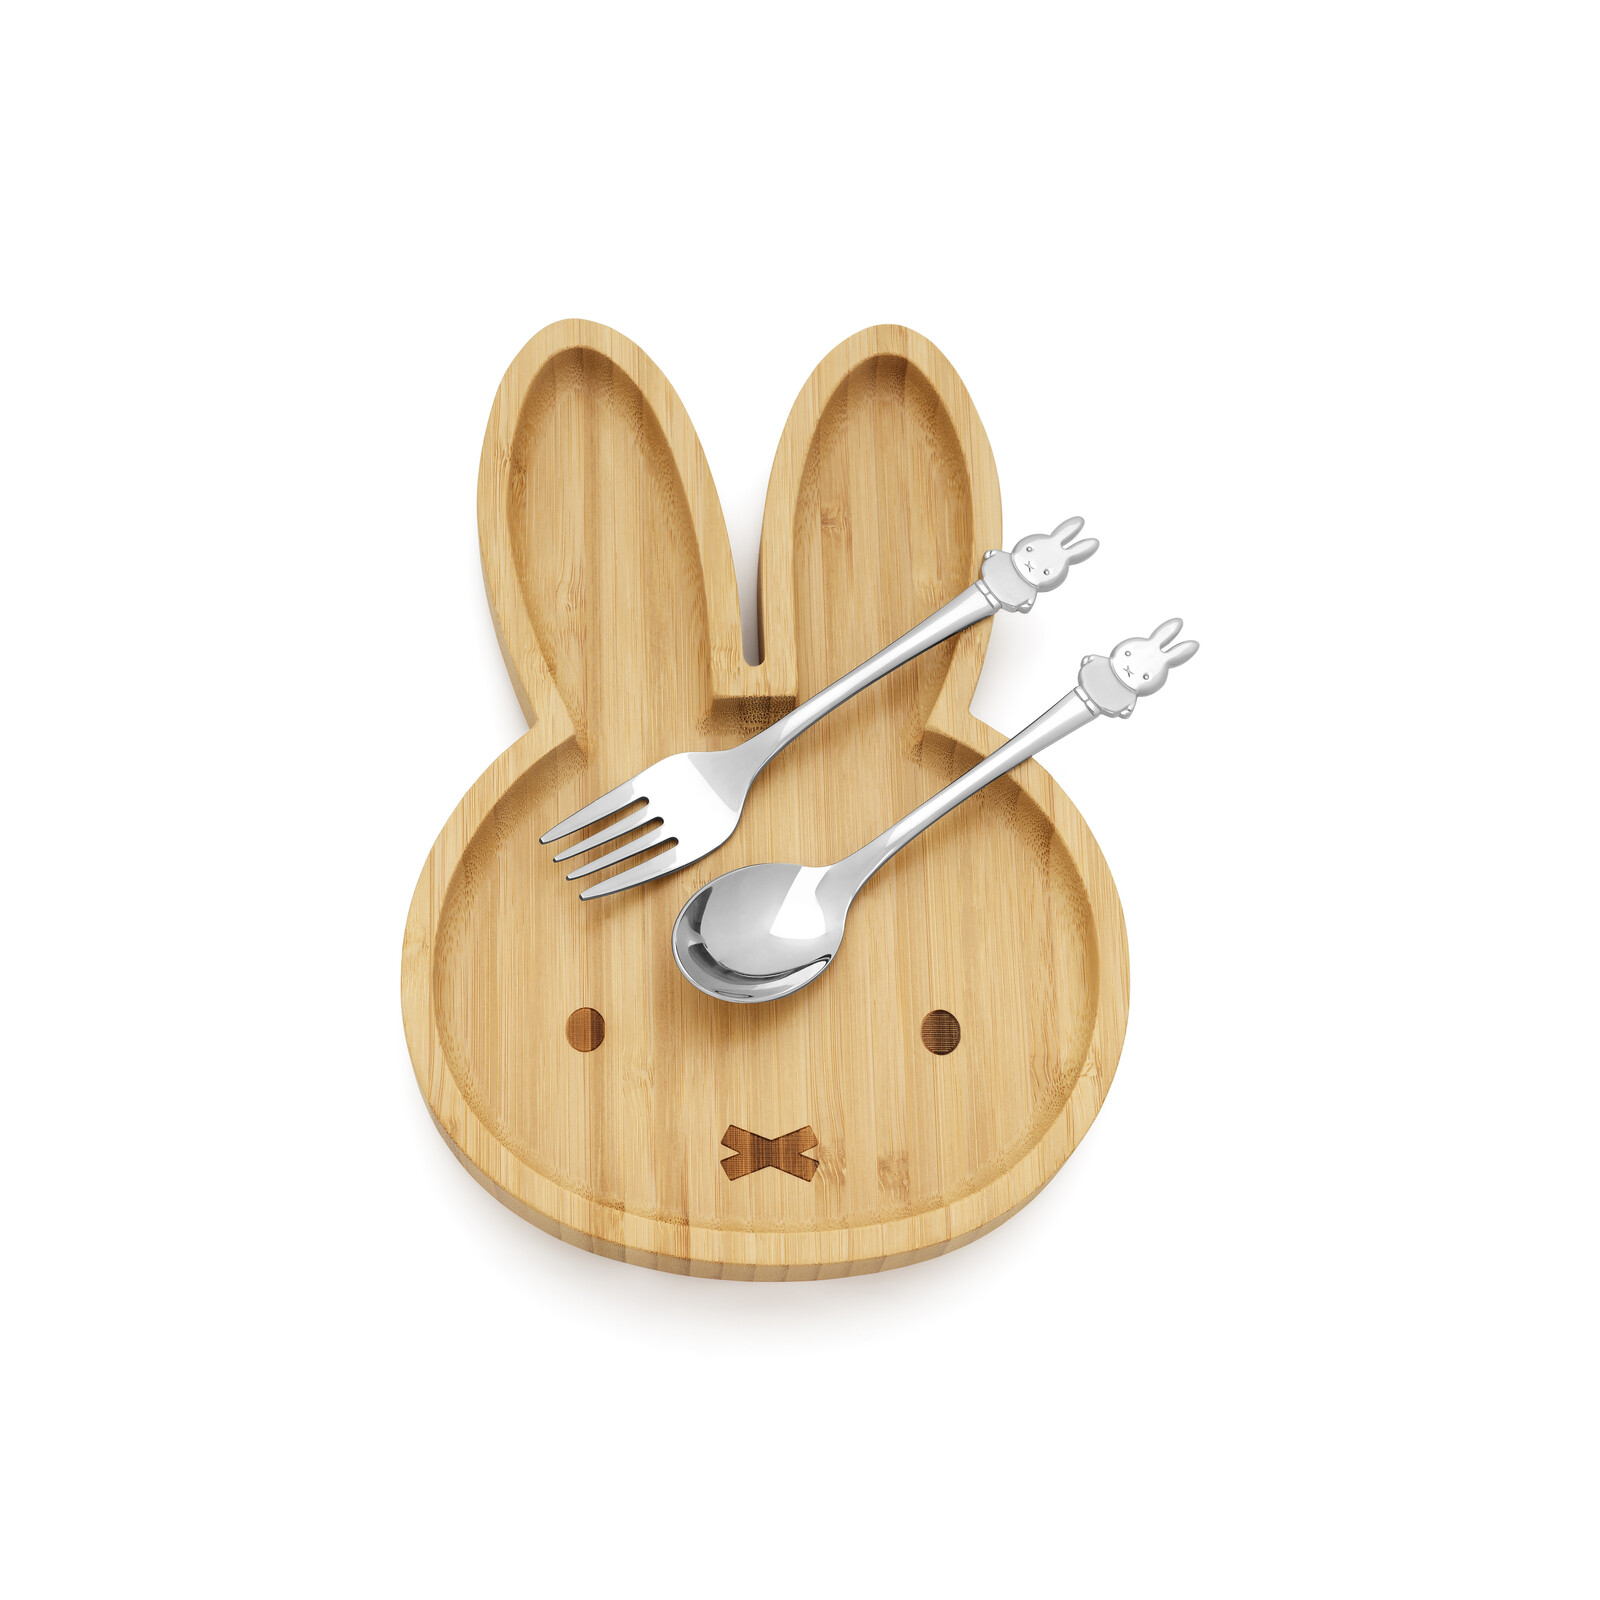 Bamboo plate Mijn + stainless steel spoon and fork set